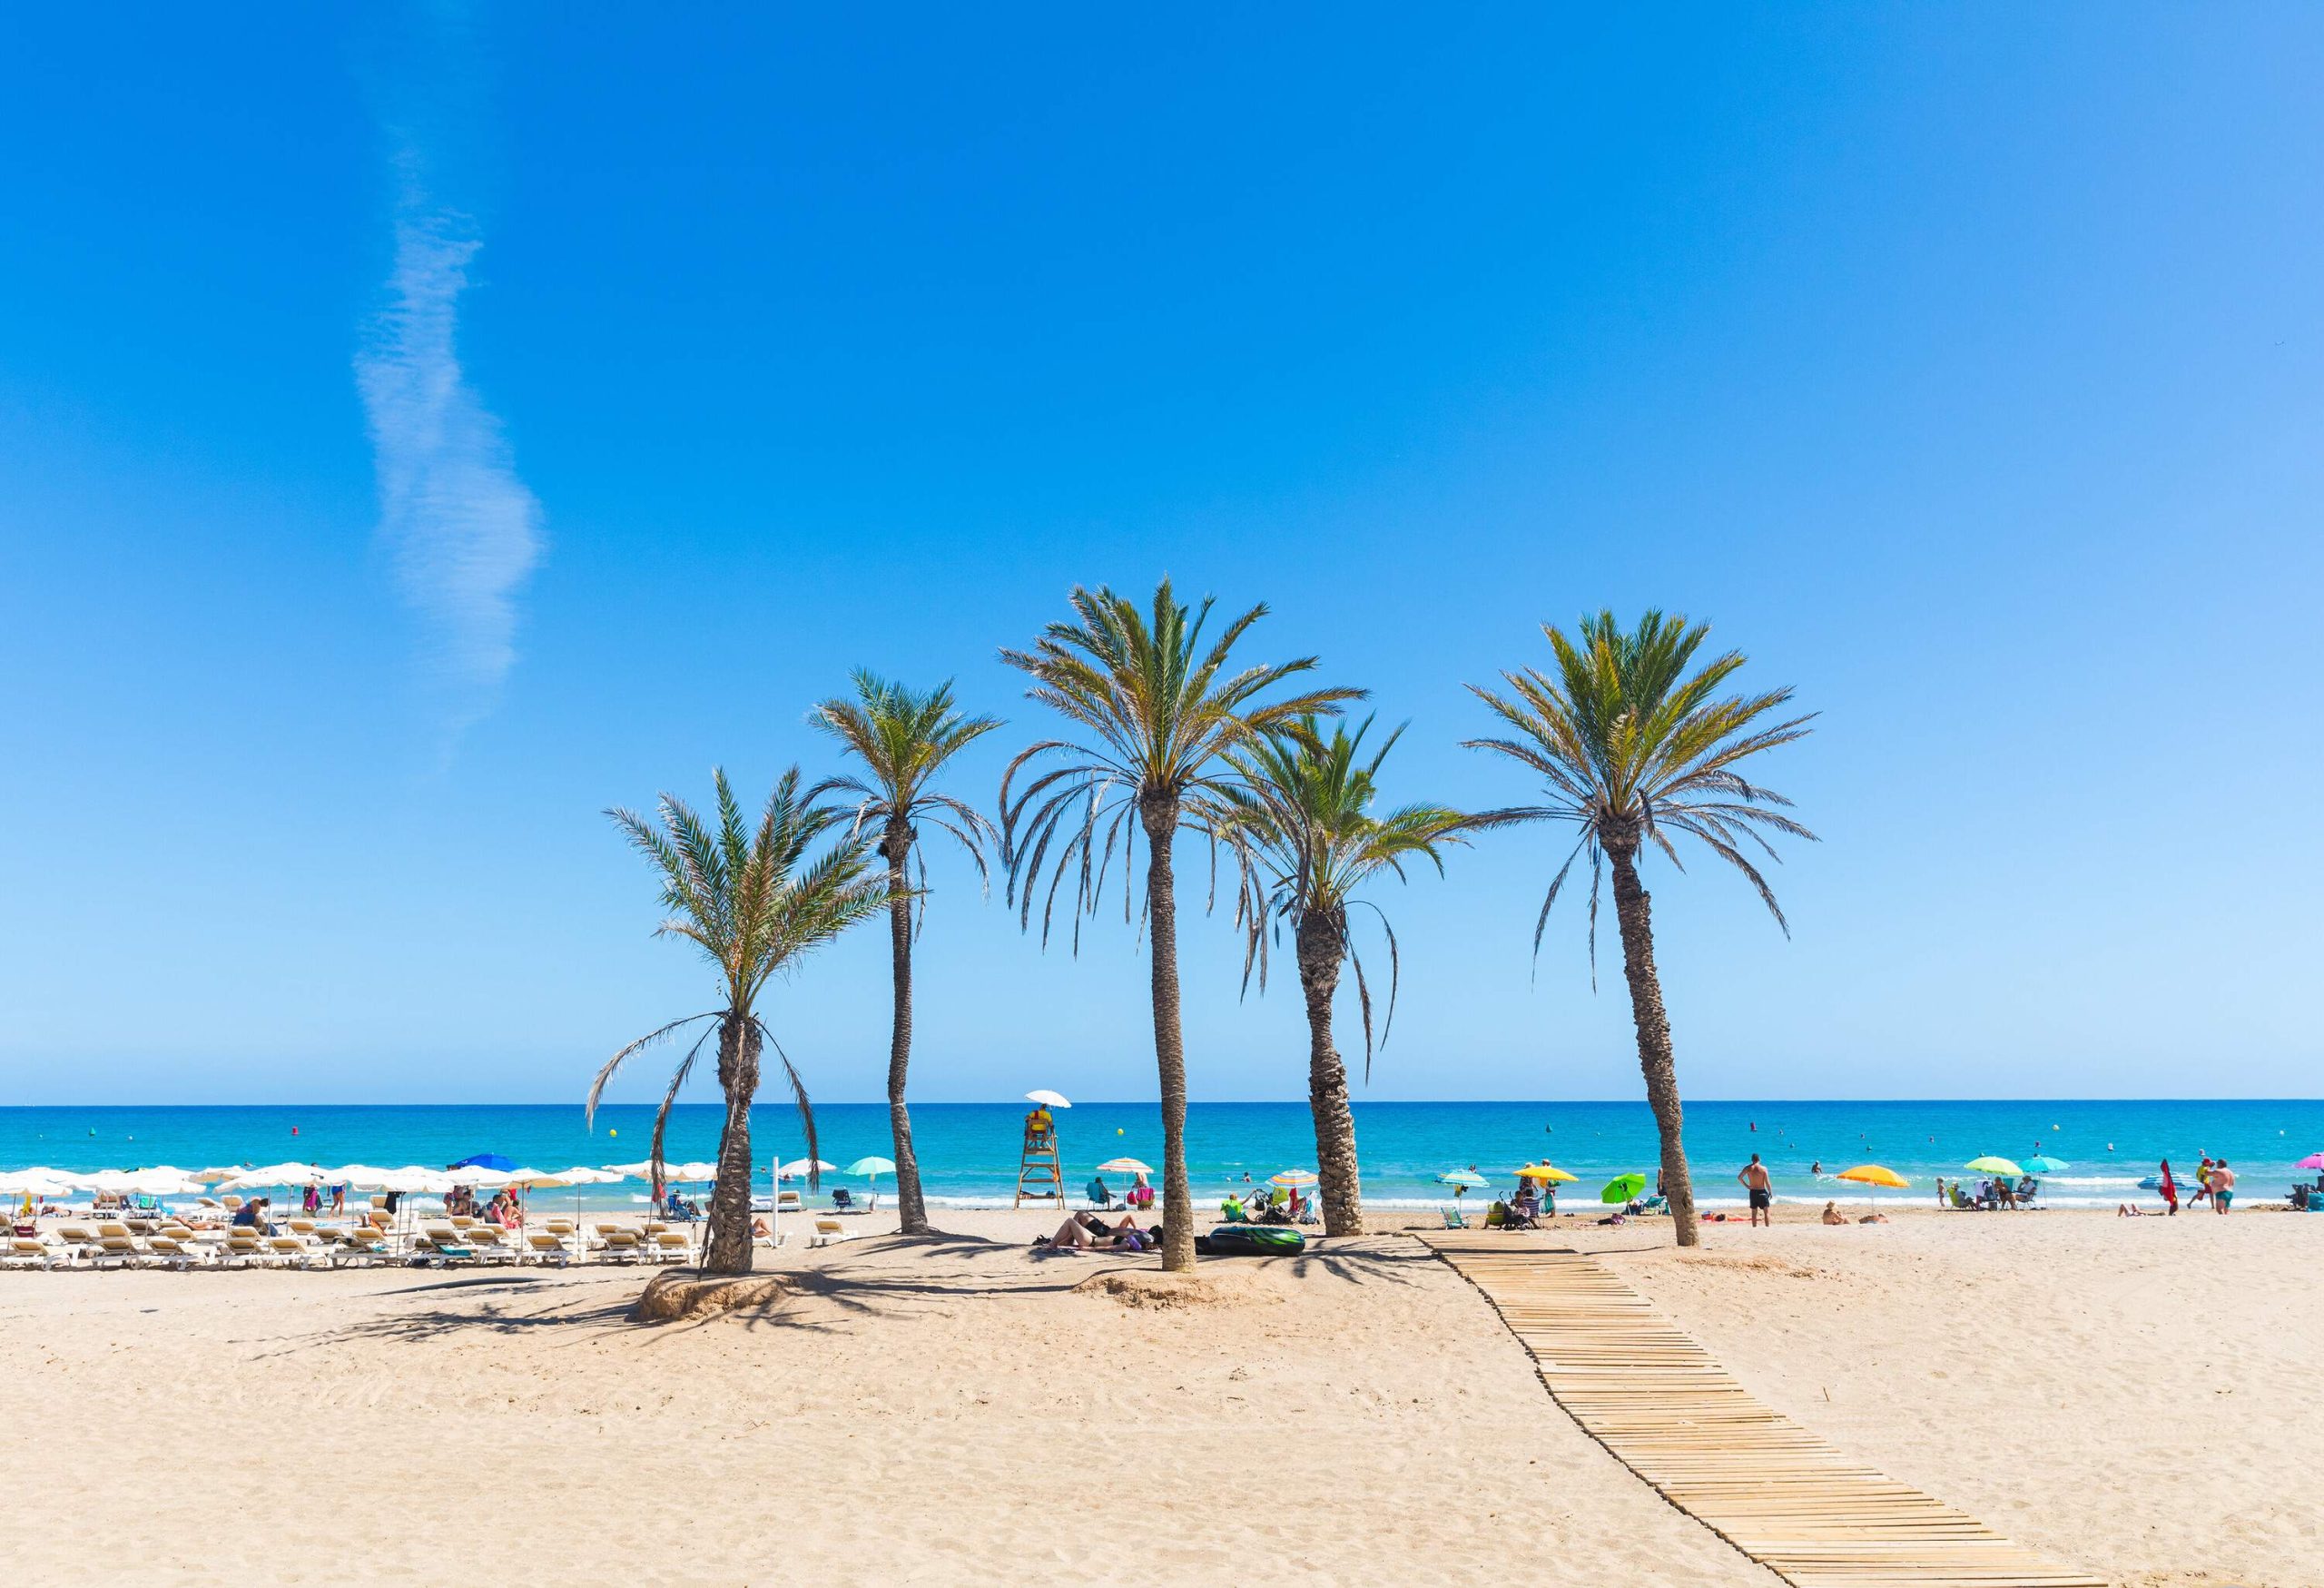 Five graceful palm trees line the sandy beach, offering shade to parasols and beach beds as beachgoers soak up the sun and enjoy the idyllic, leisurely atmosphere.